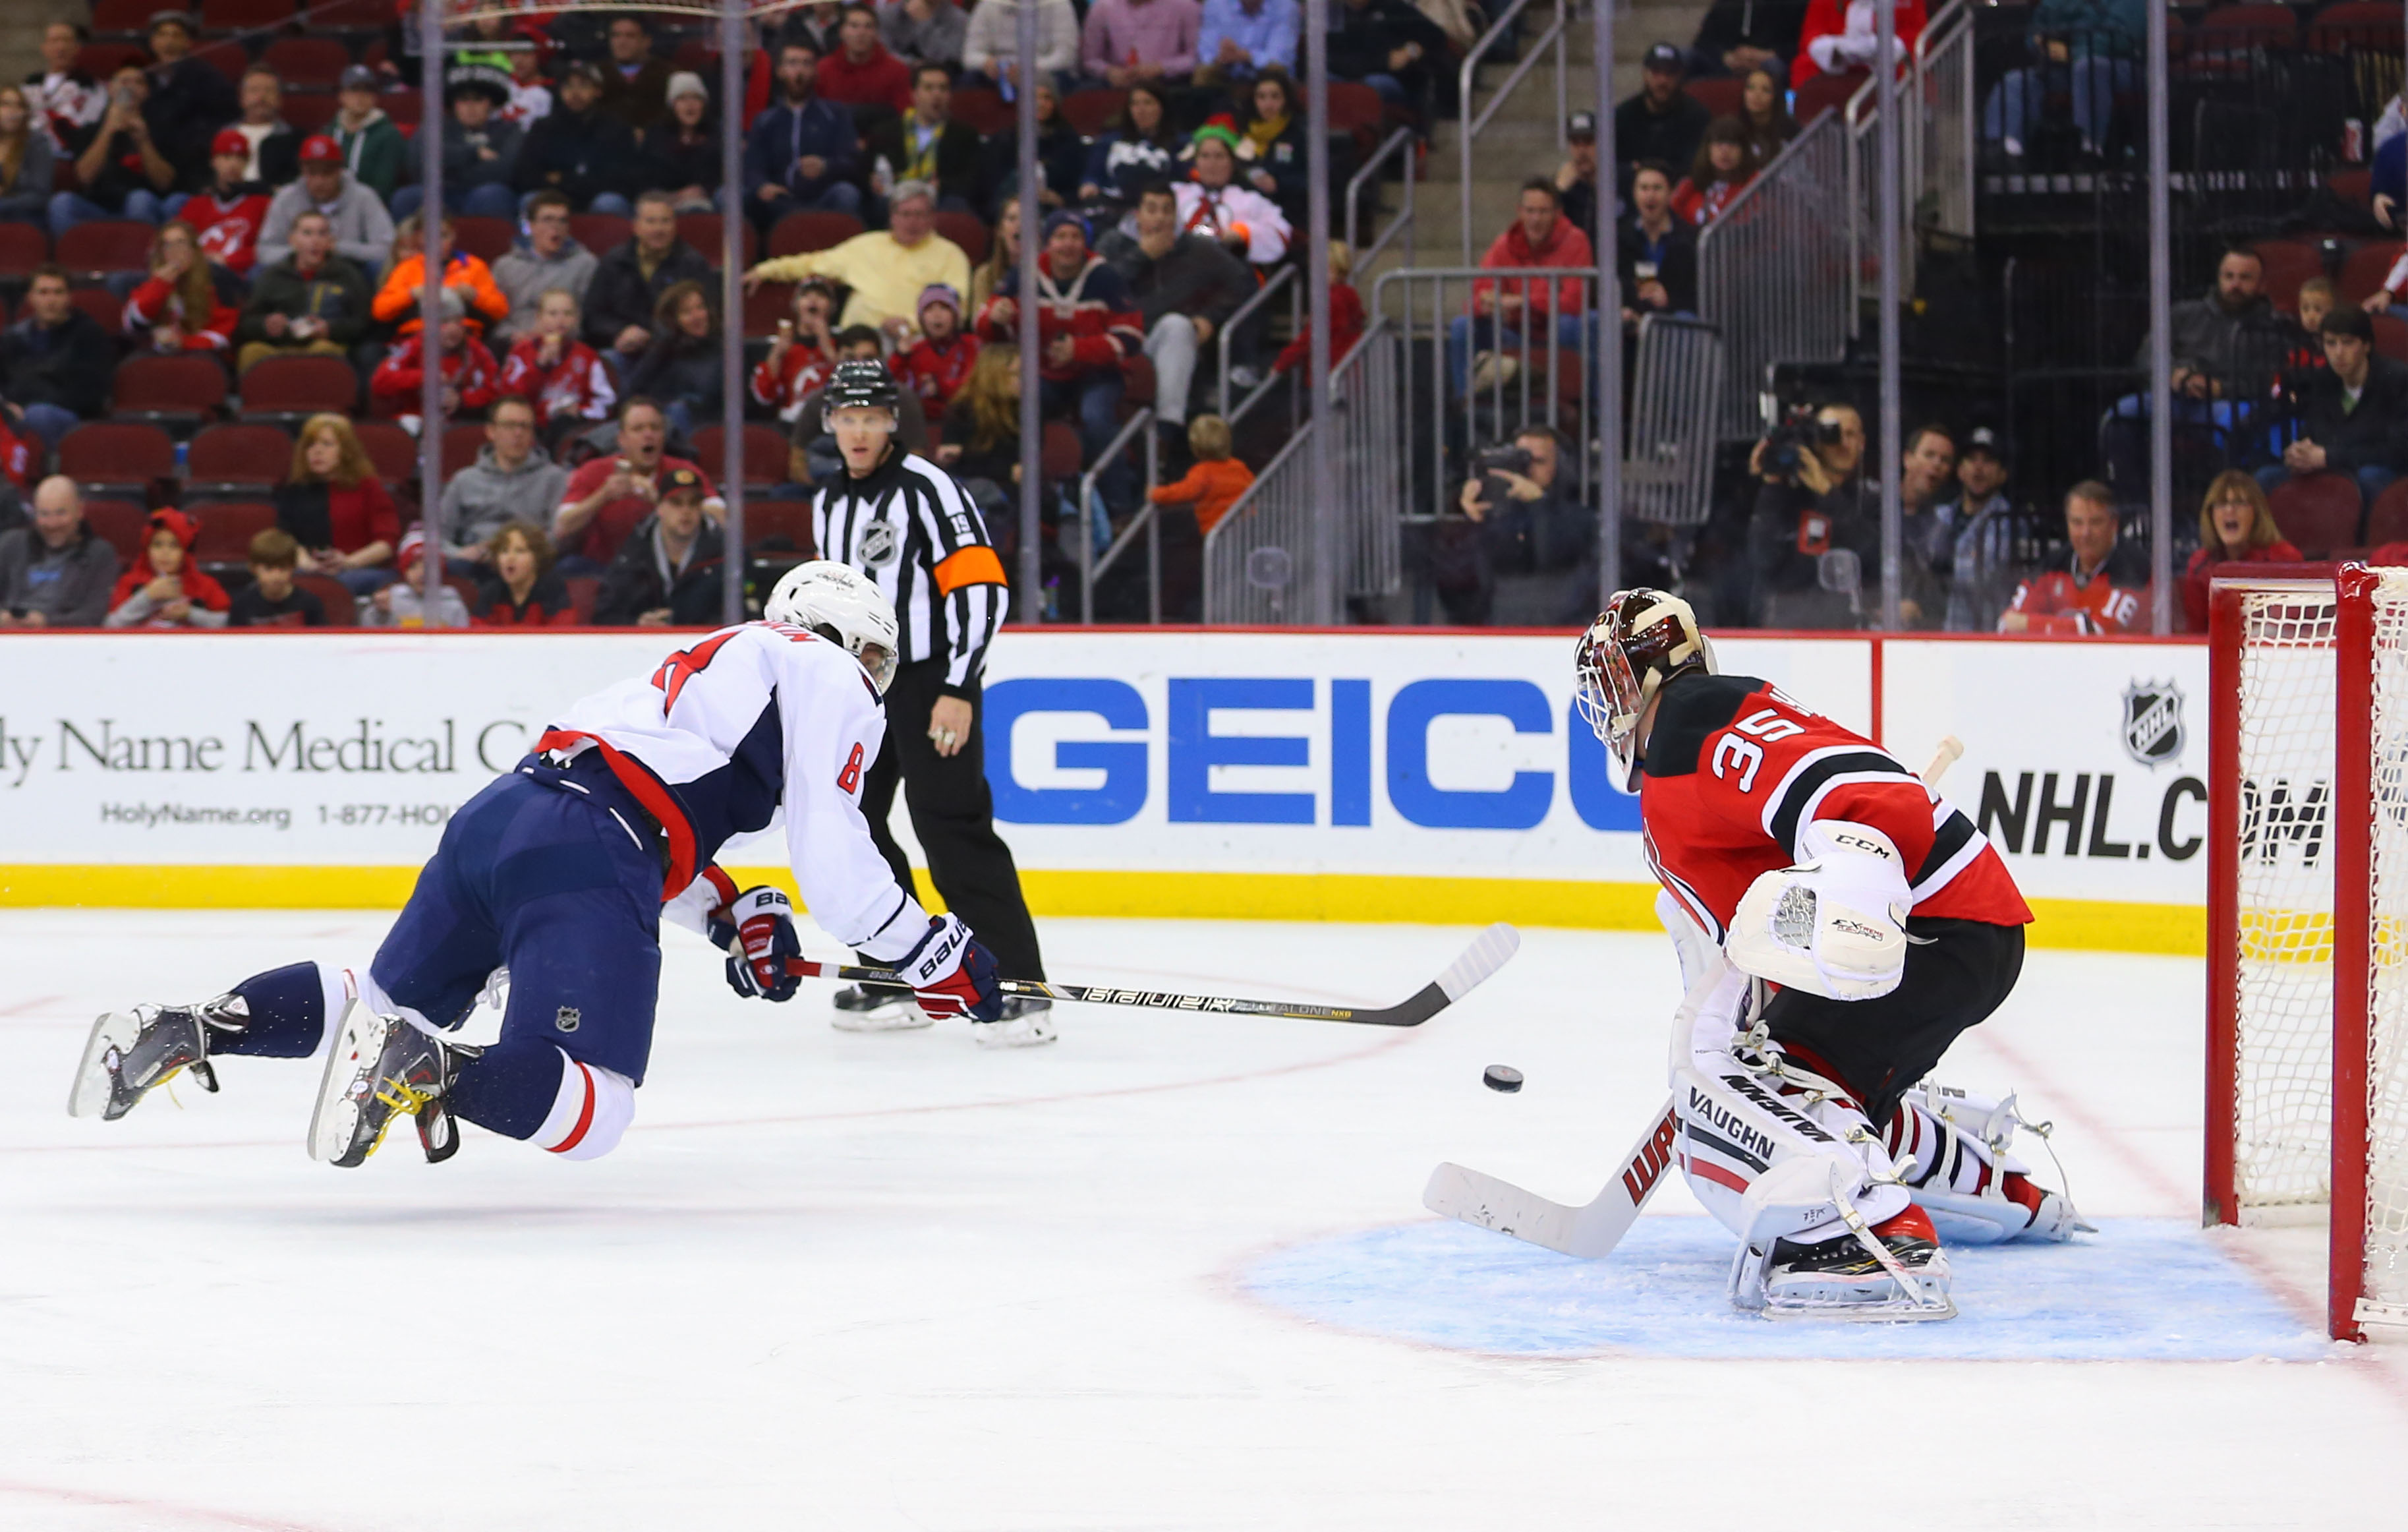 Alex Ovechkin scores past Cory Schneider while airborne. (Ed Mulholland, USA TODAY Sports)